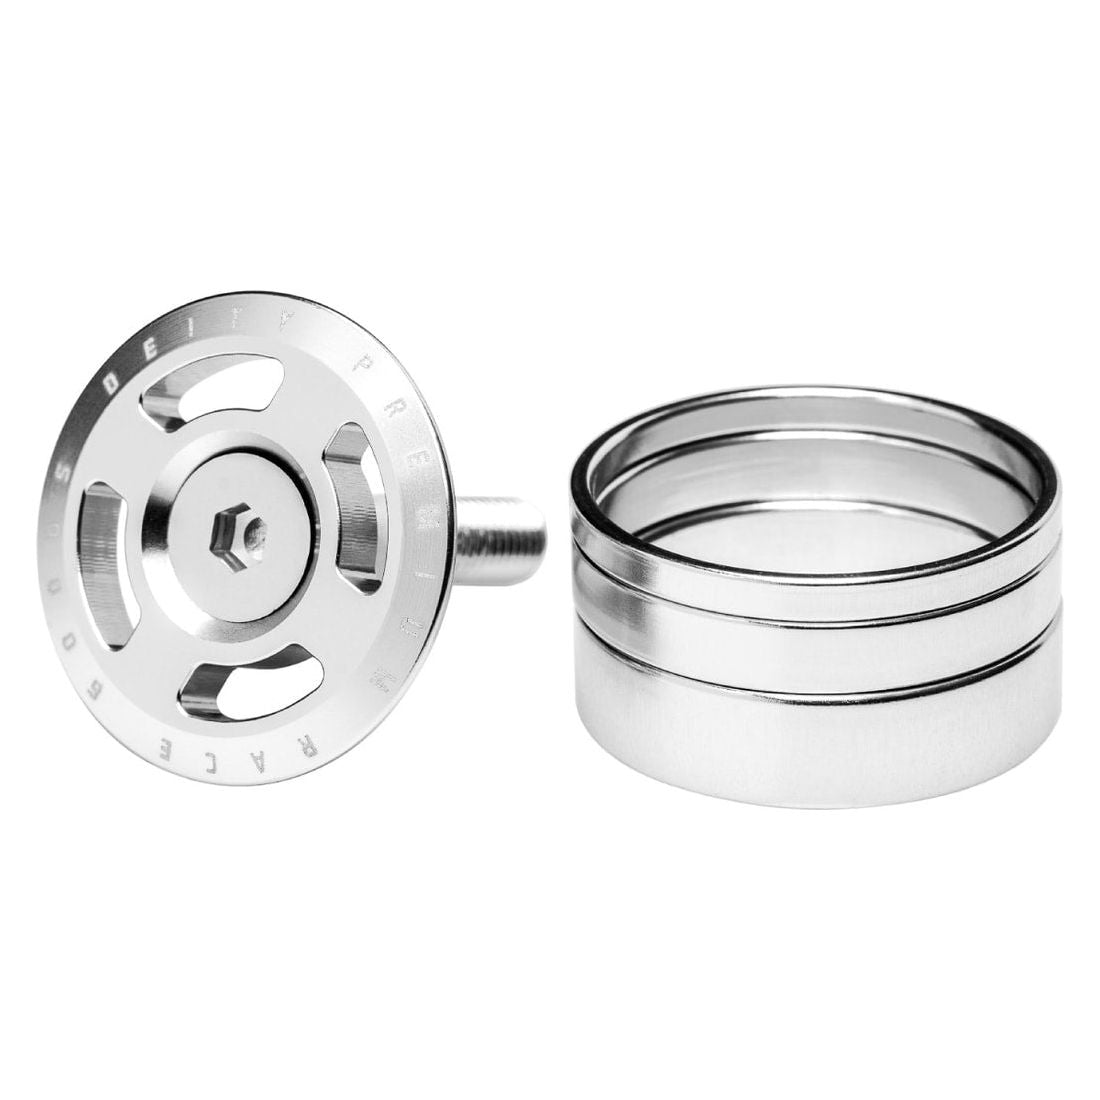 Deity Crosshair Headset Spacer and Top Cap Kit - Silver - Image 1